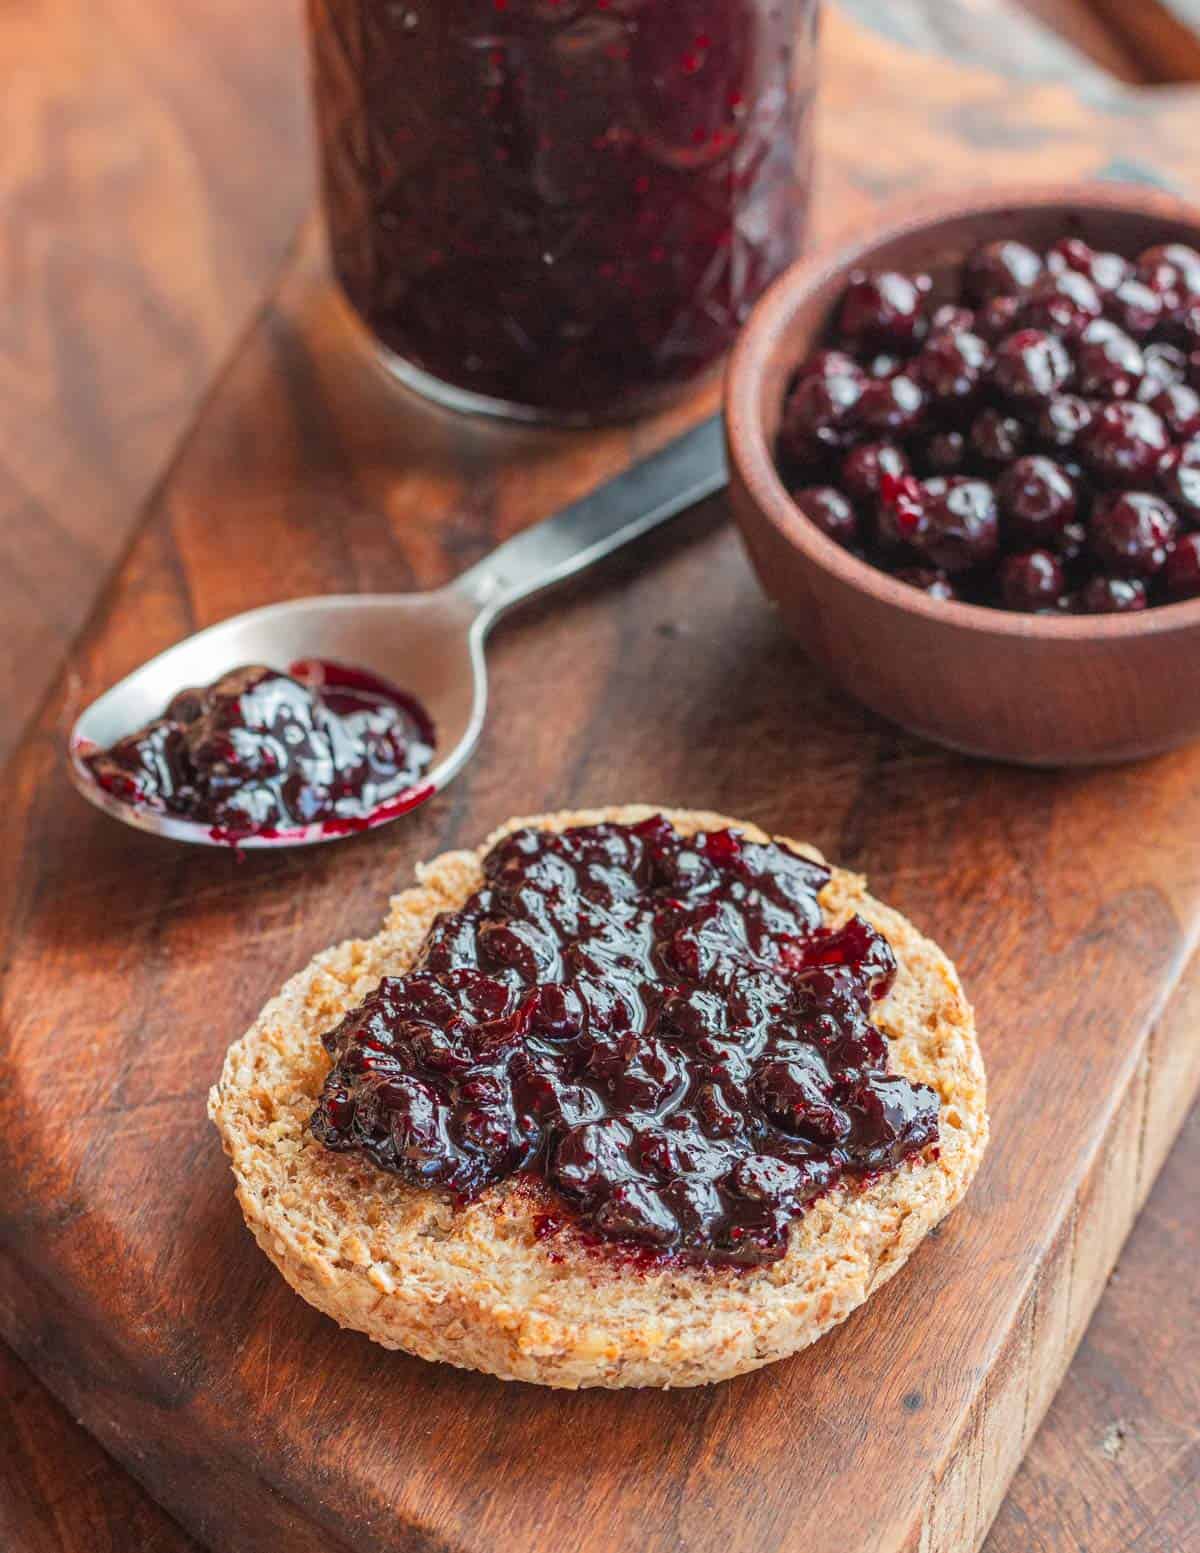 A buttered English muffin spread with black currant jam next to a bowl of fresh black currants and jar of jam.